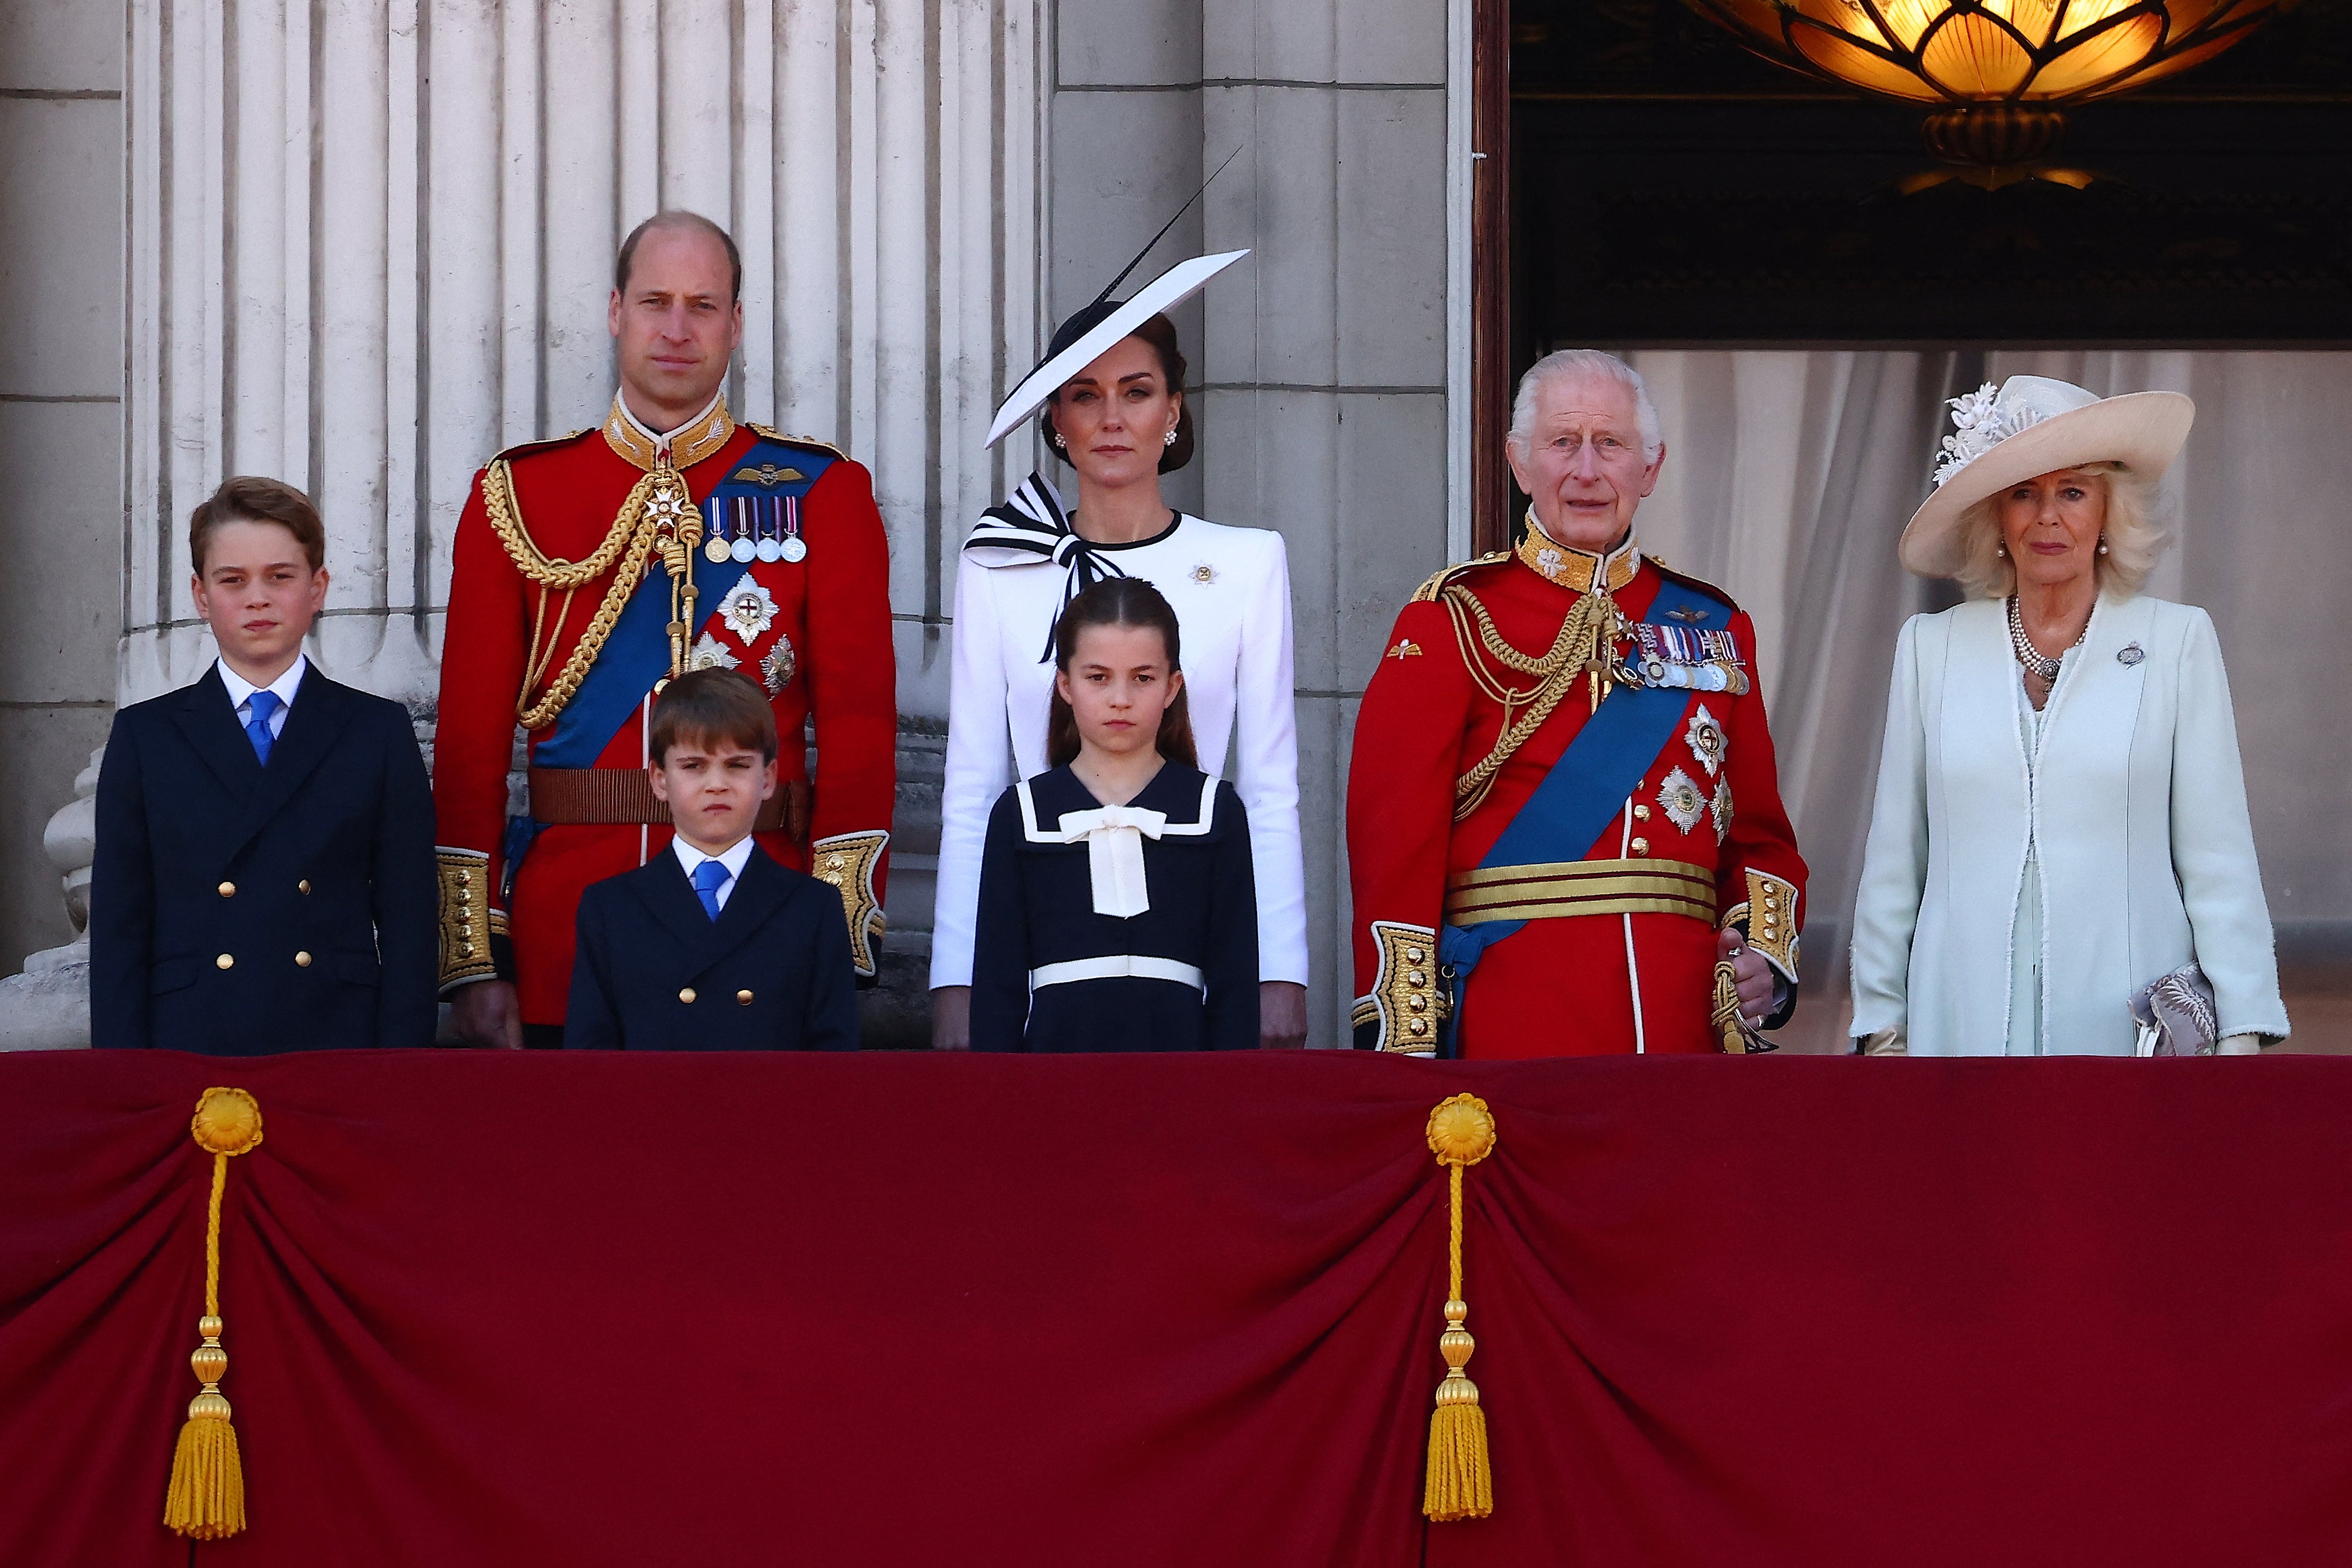 The royal family joins King Charles on the balcony of Buckingham Palace